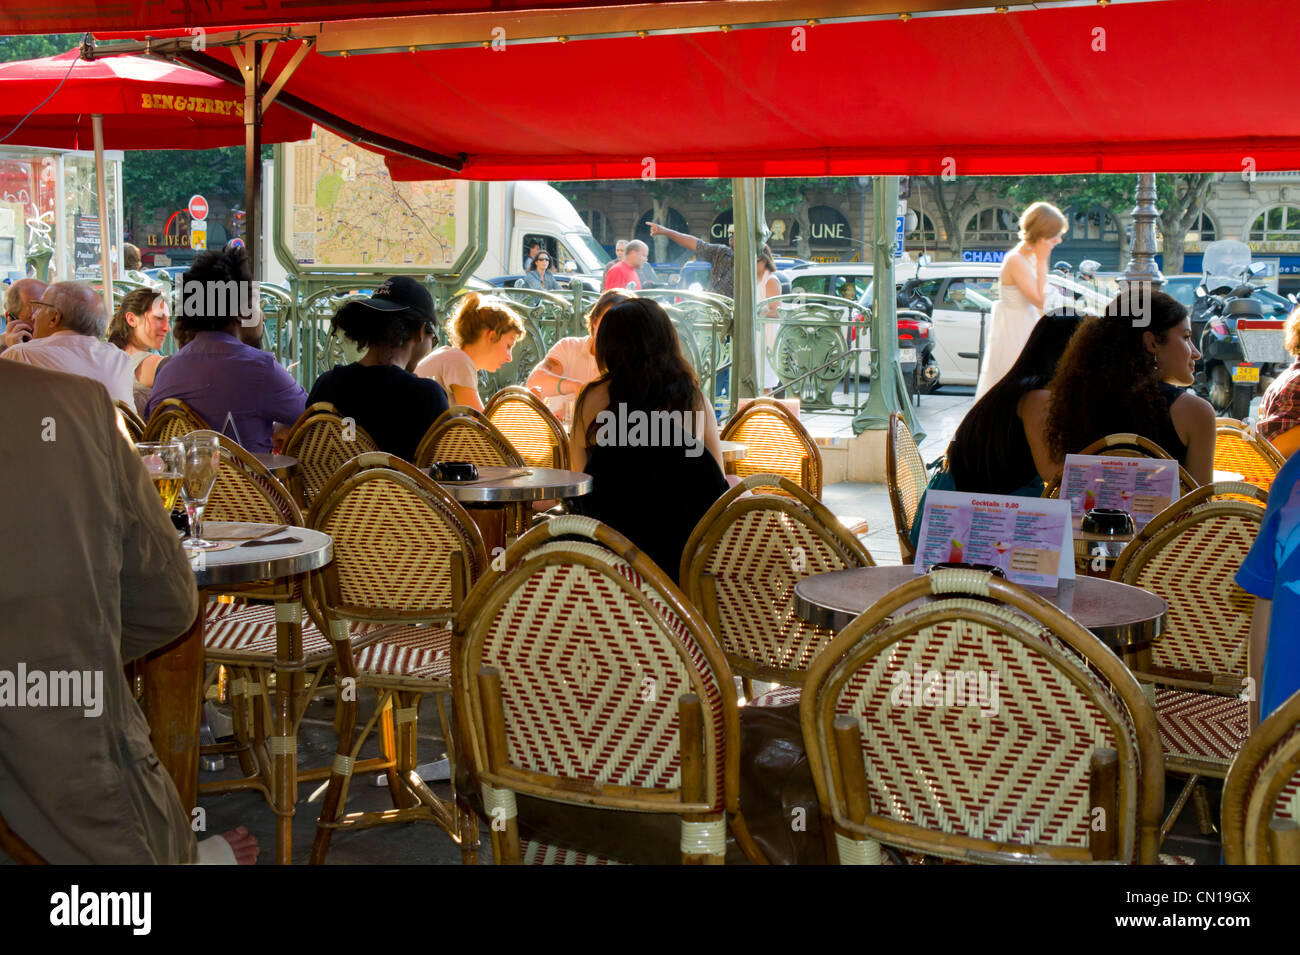 Europe, France, Paris, cafe outdoors day Stock Photo